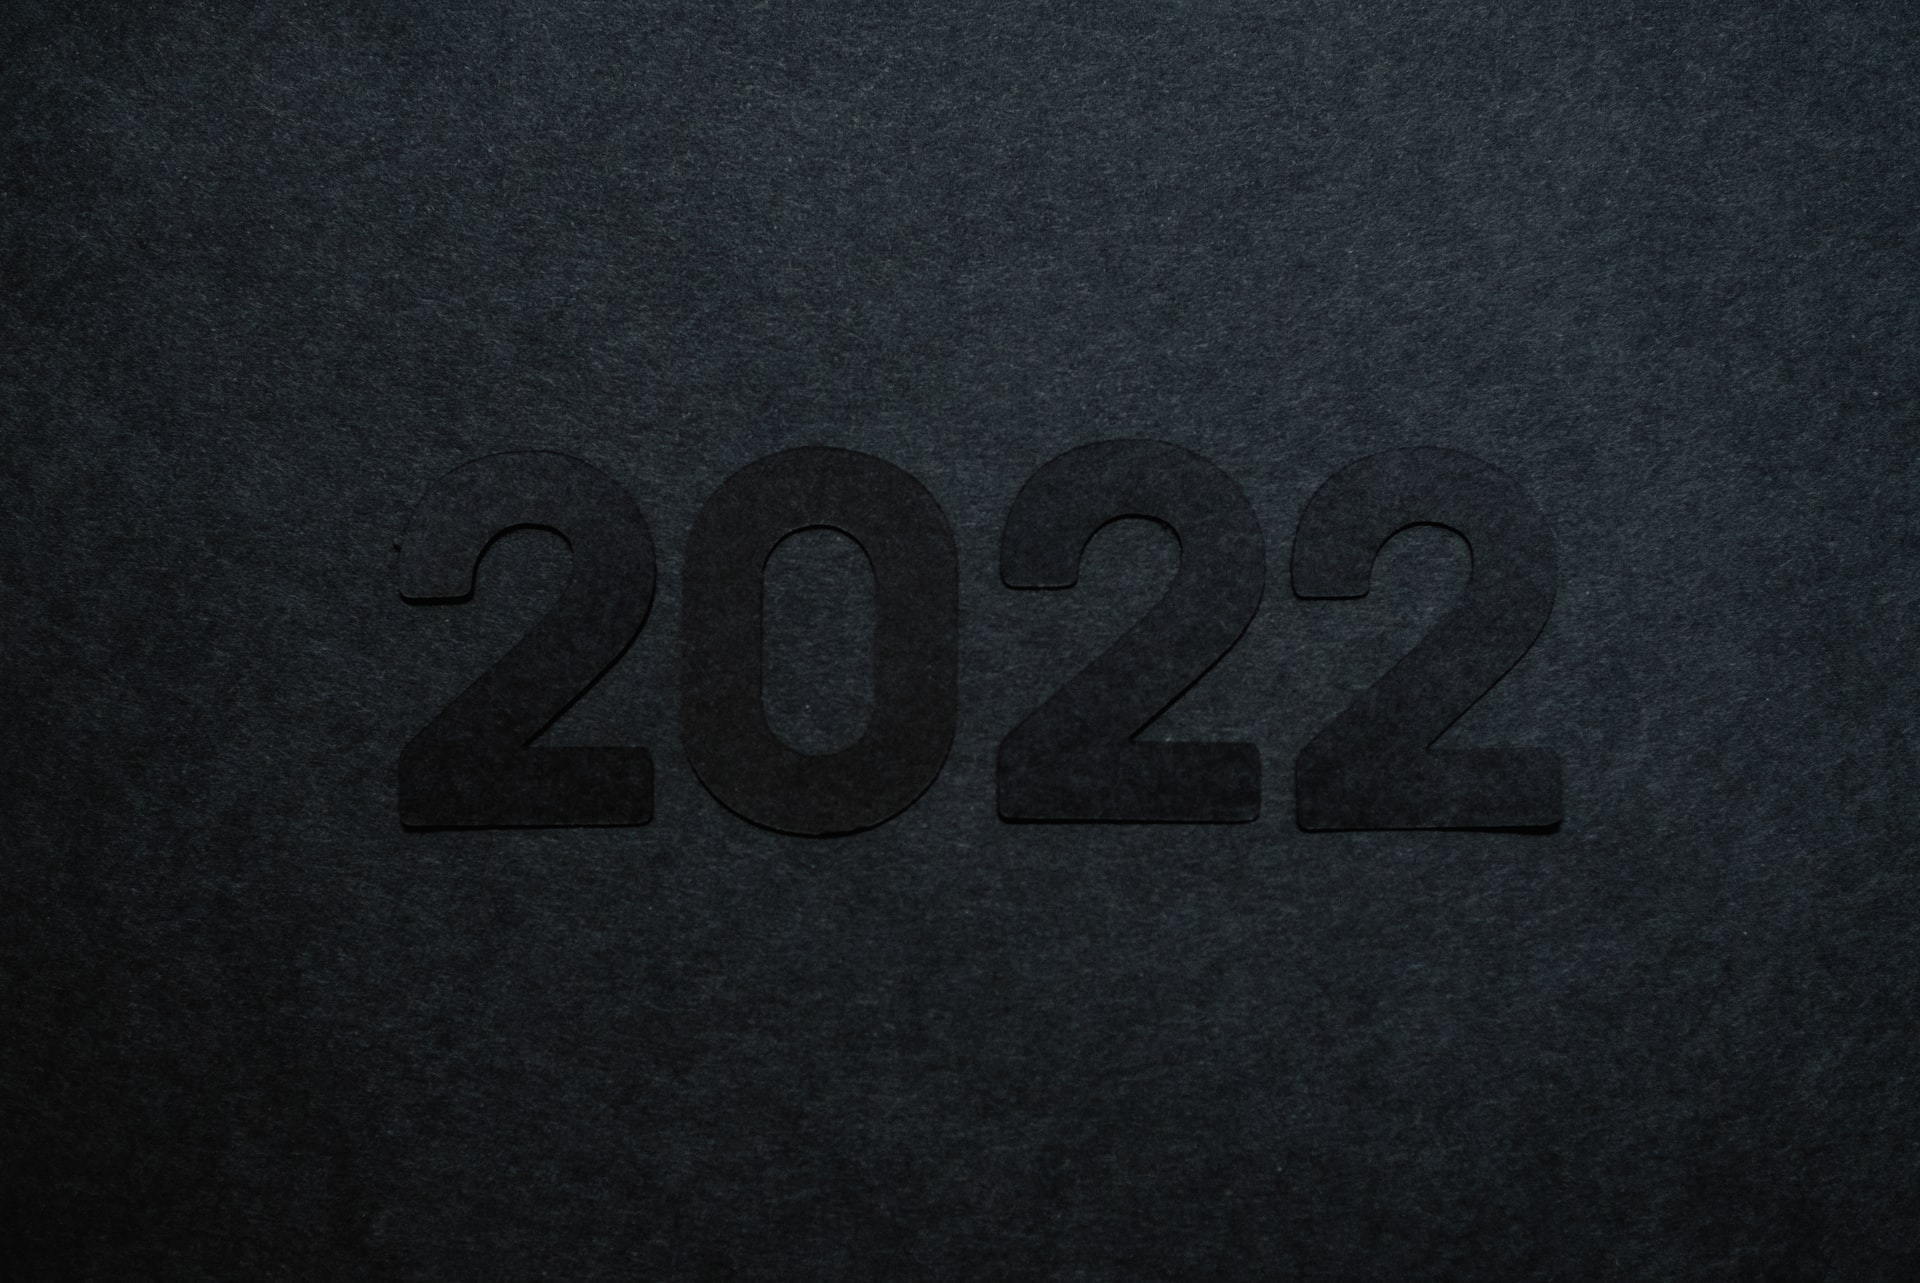 A photo of "2022" written in black letters against a grey background.